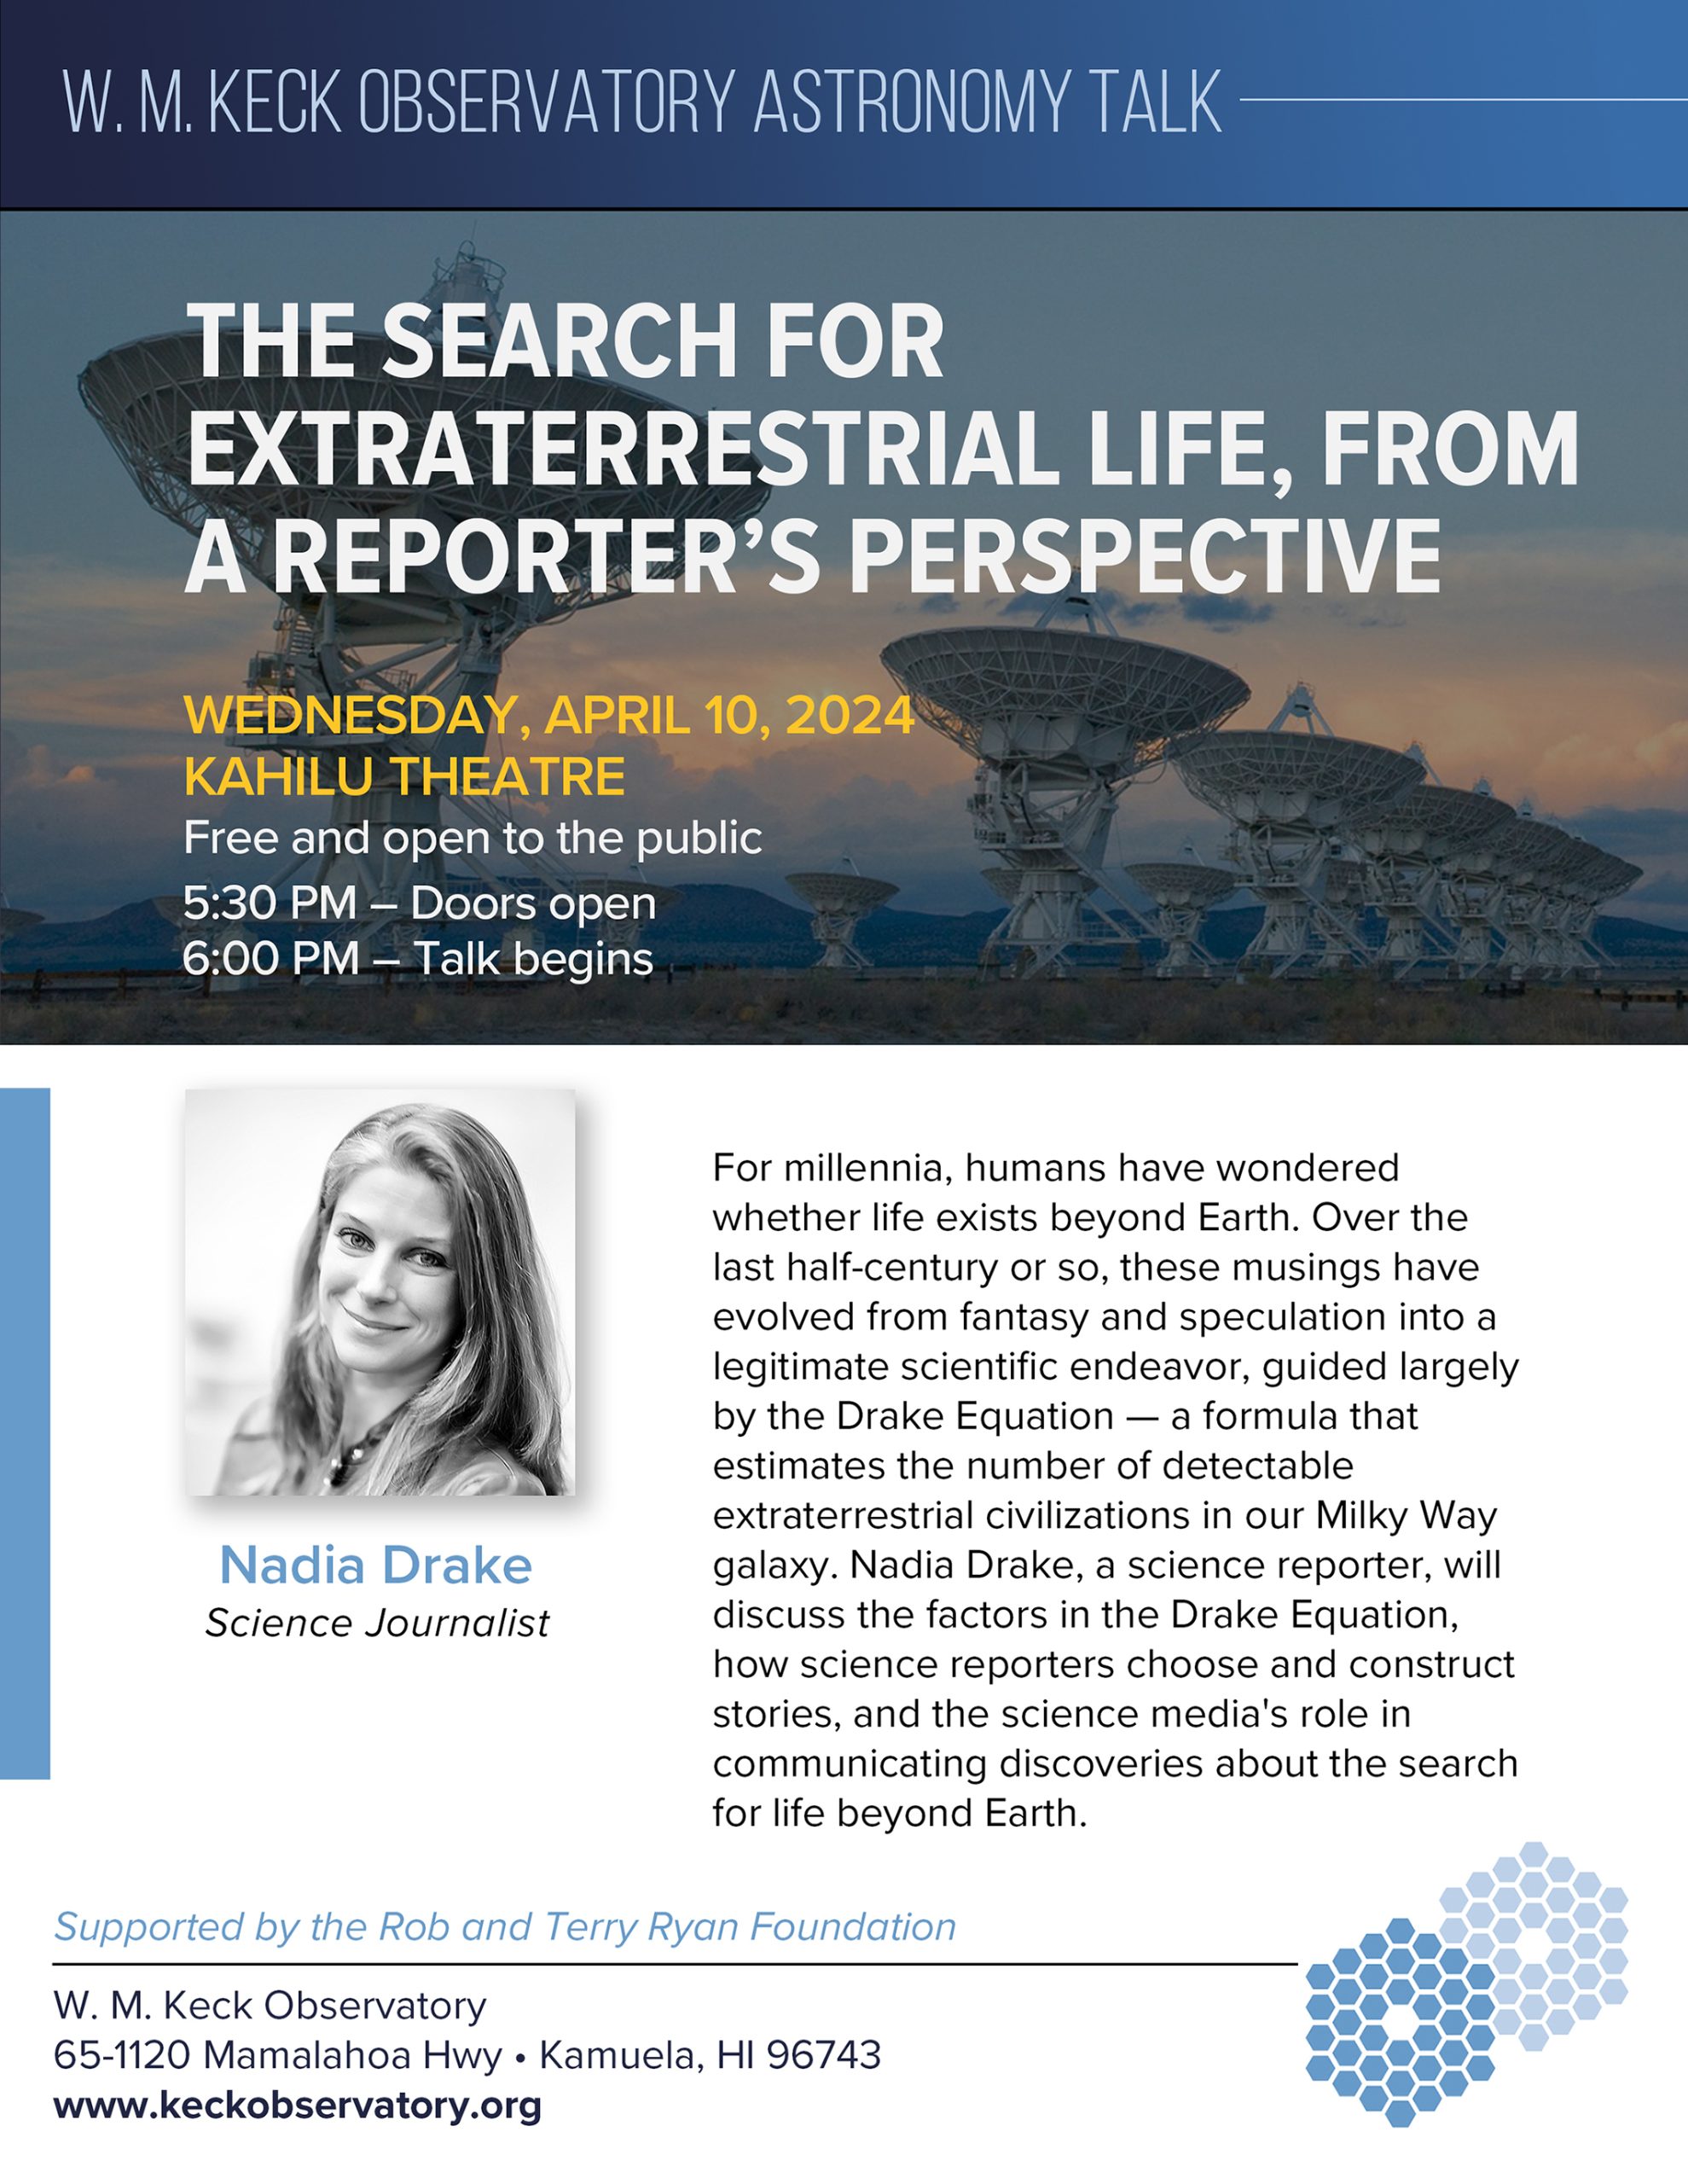 The search for extraterrestrial life, from a reporter's perspective 4/10/2024 at Kahilu Theatre. Free and open to the public. 5:30pm - doors open. 6:00pm - talk beings